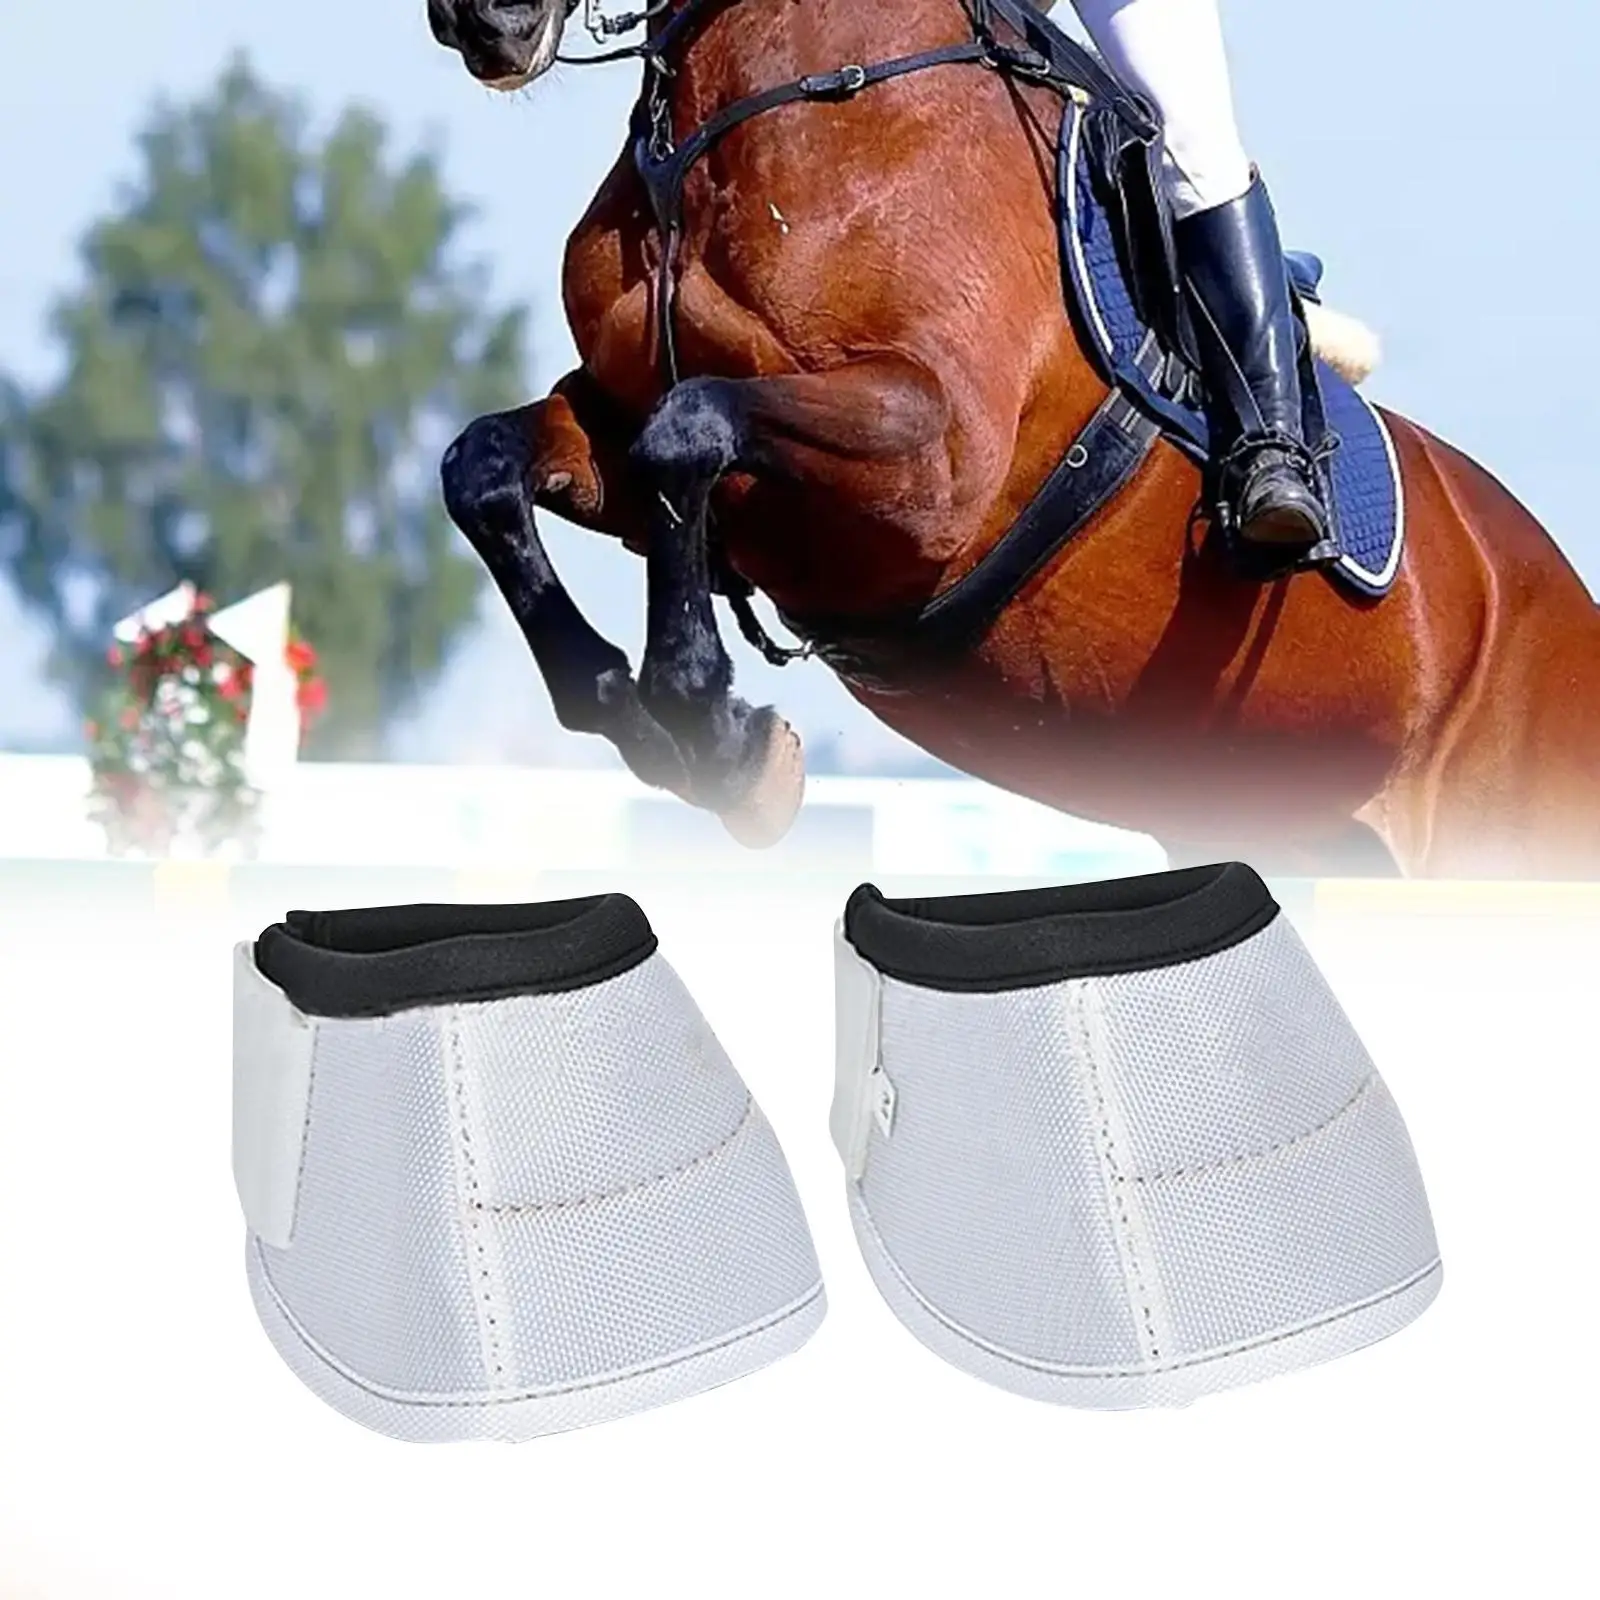 2Pcs Horse Bell Boots Horse Care Boot Durable 1680D Oxford Cloth Tear Resistant